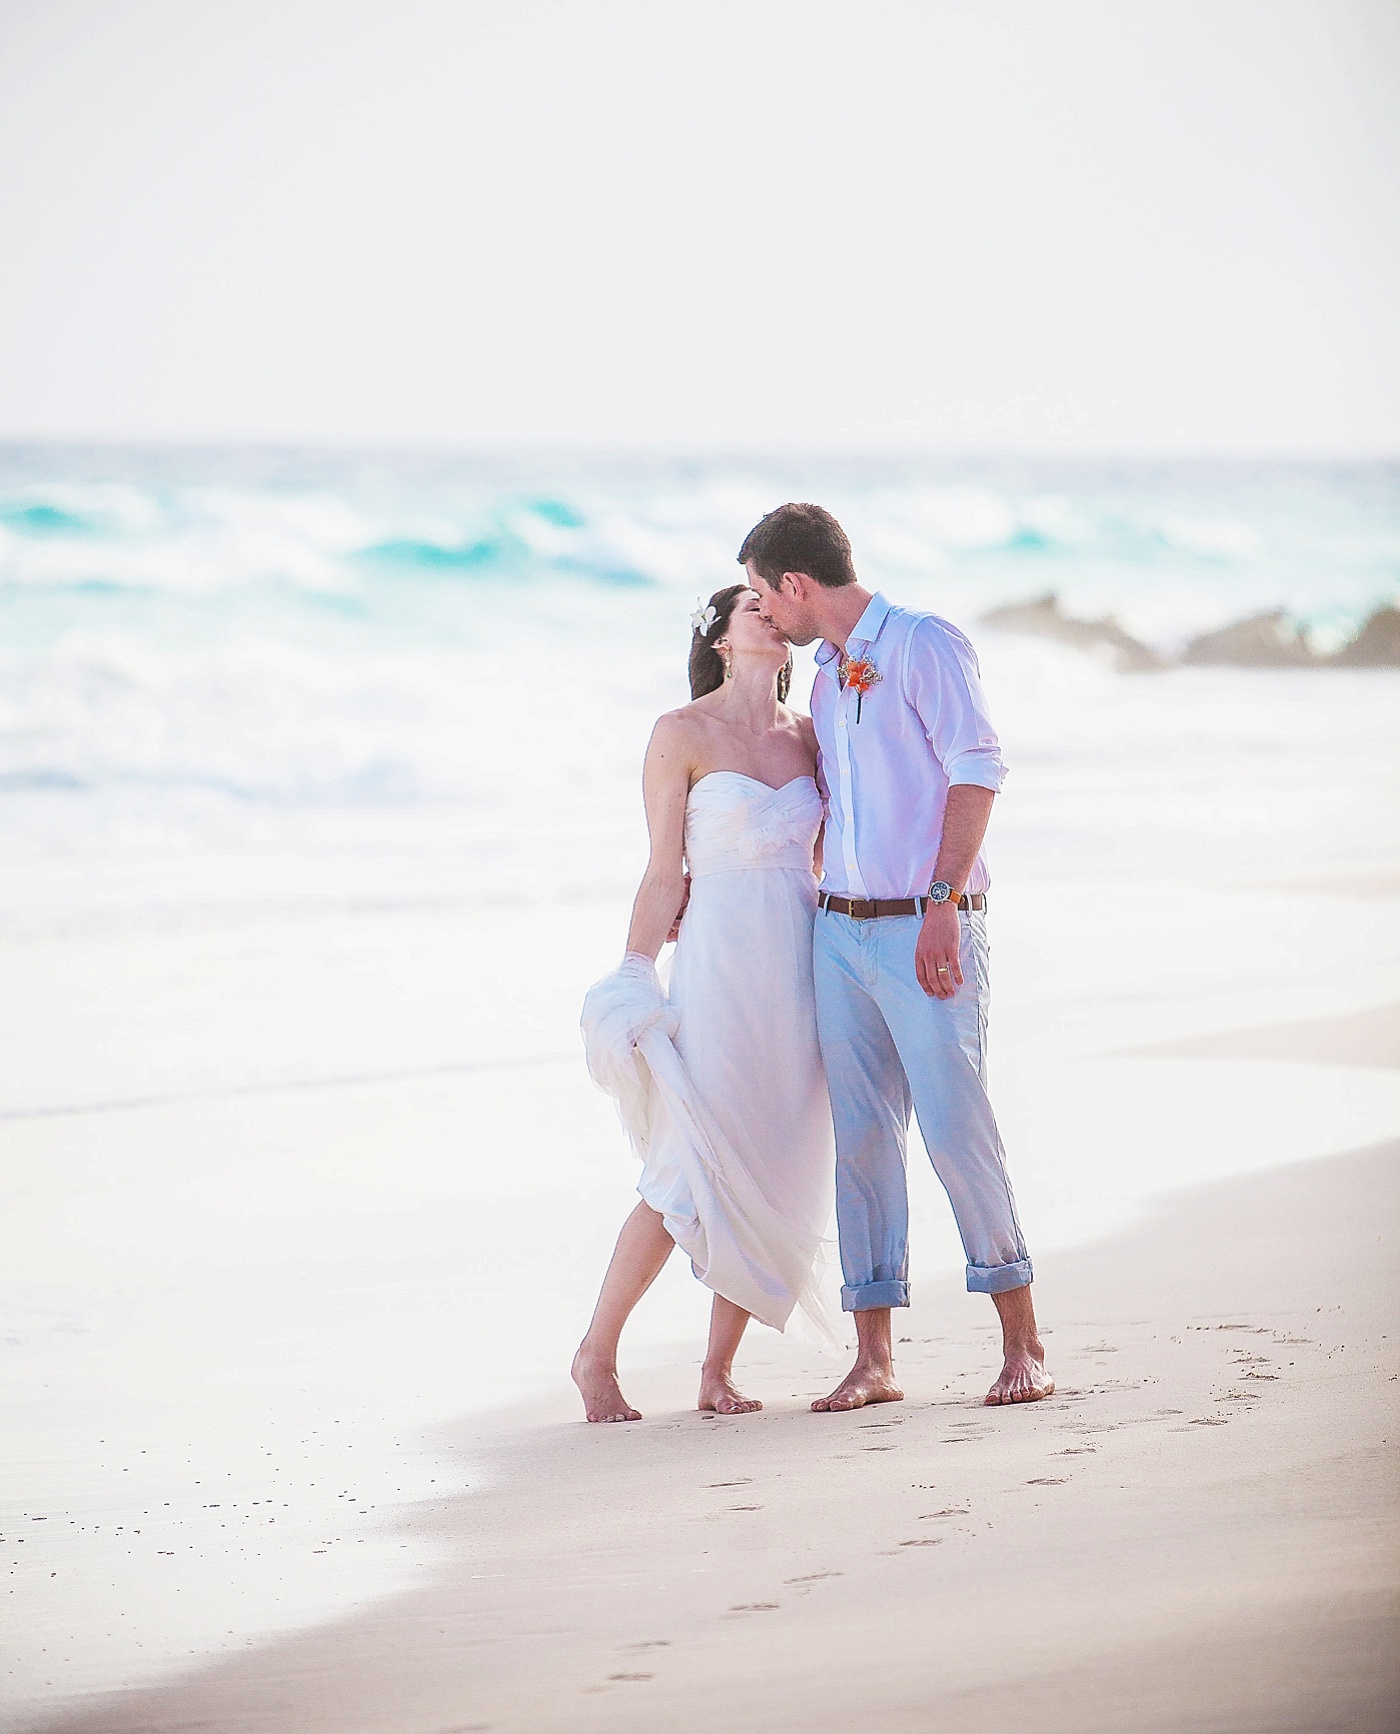 Married in Barbados - www.lauraclarkephotos.com